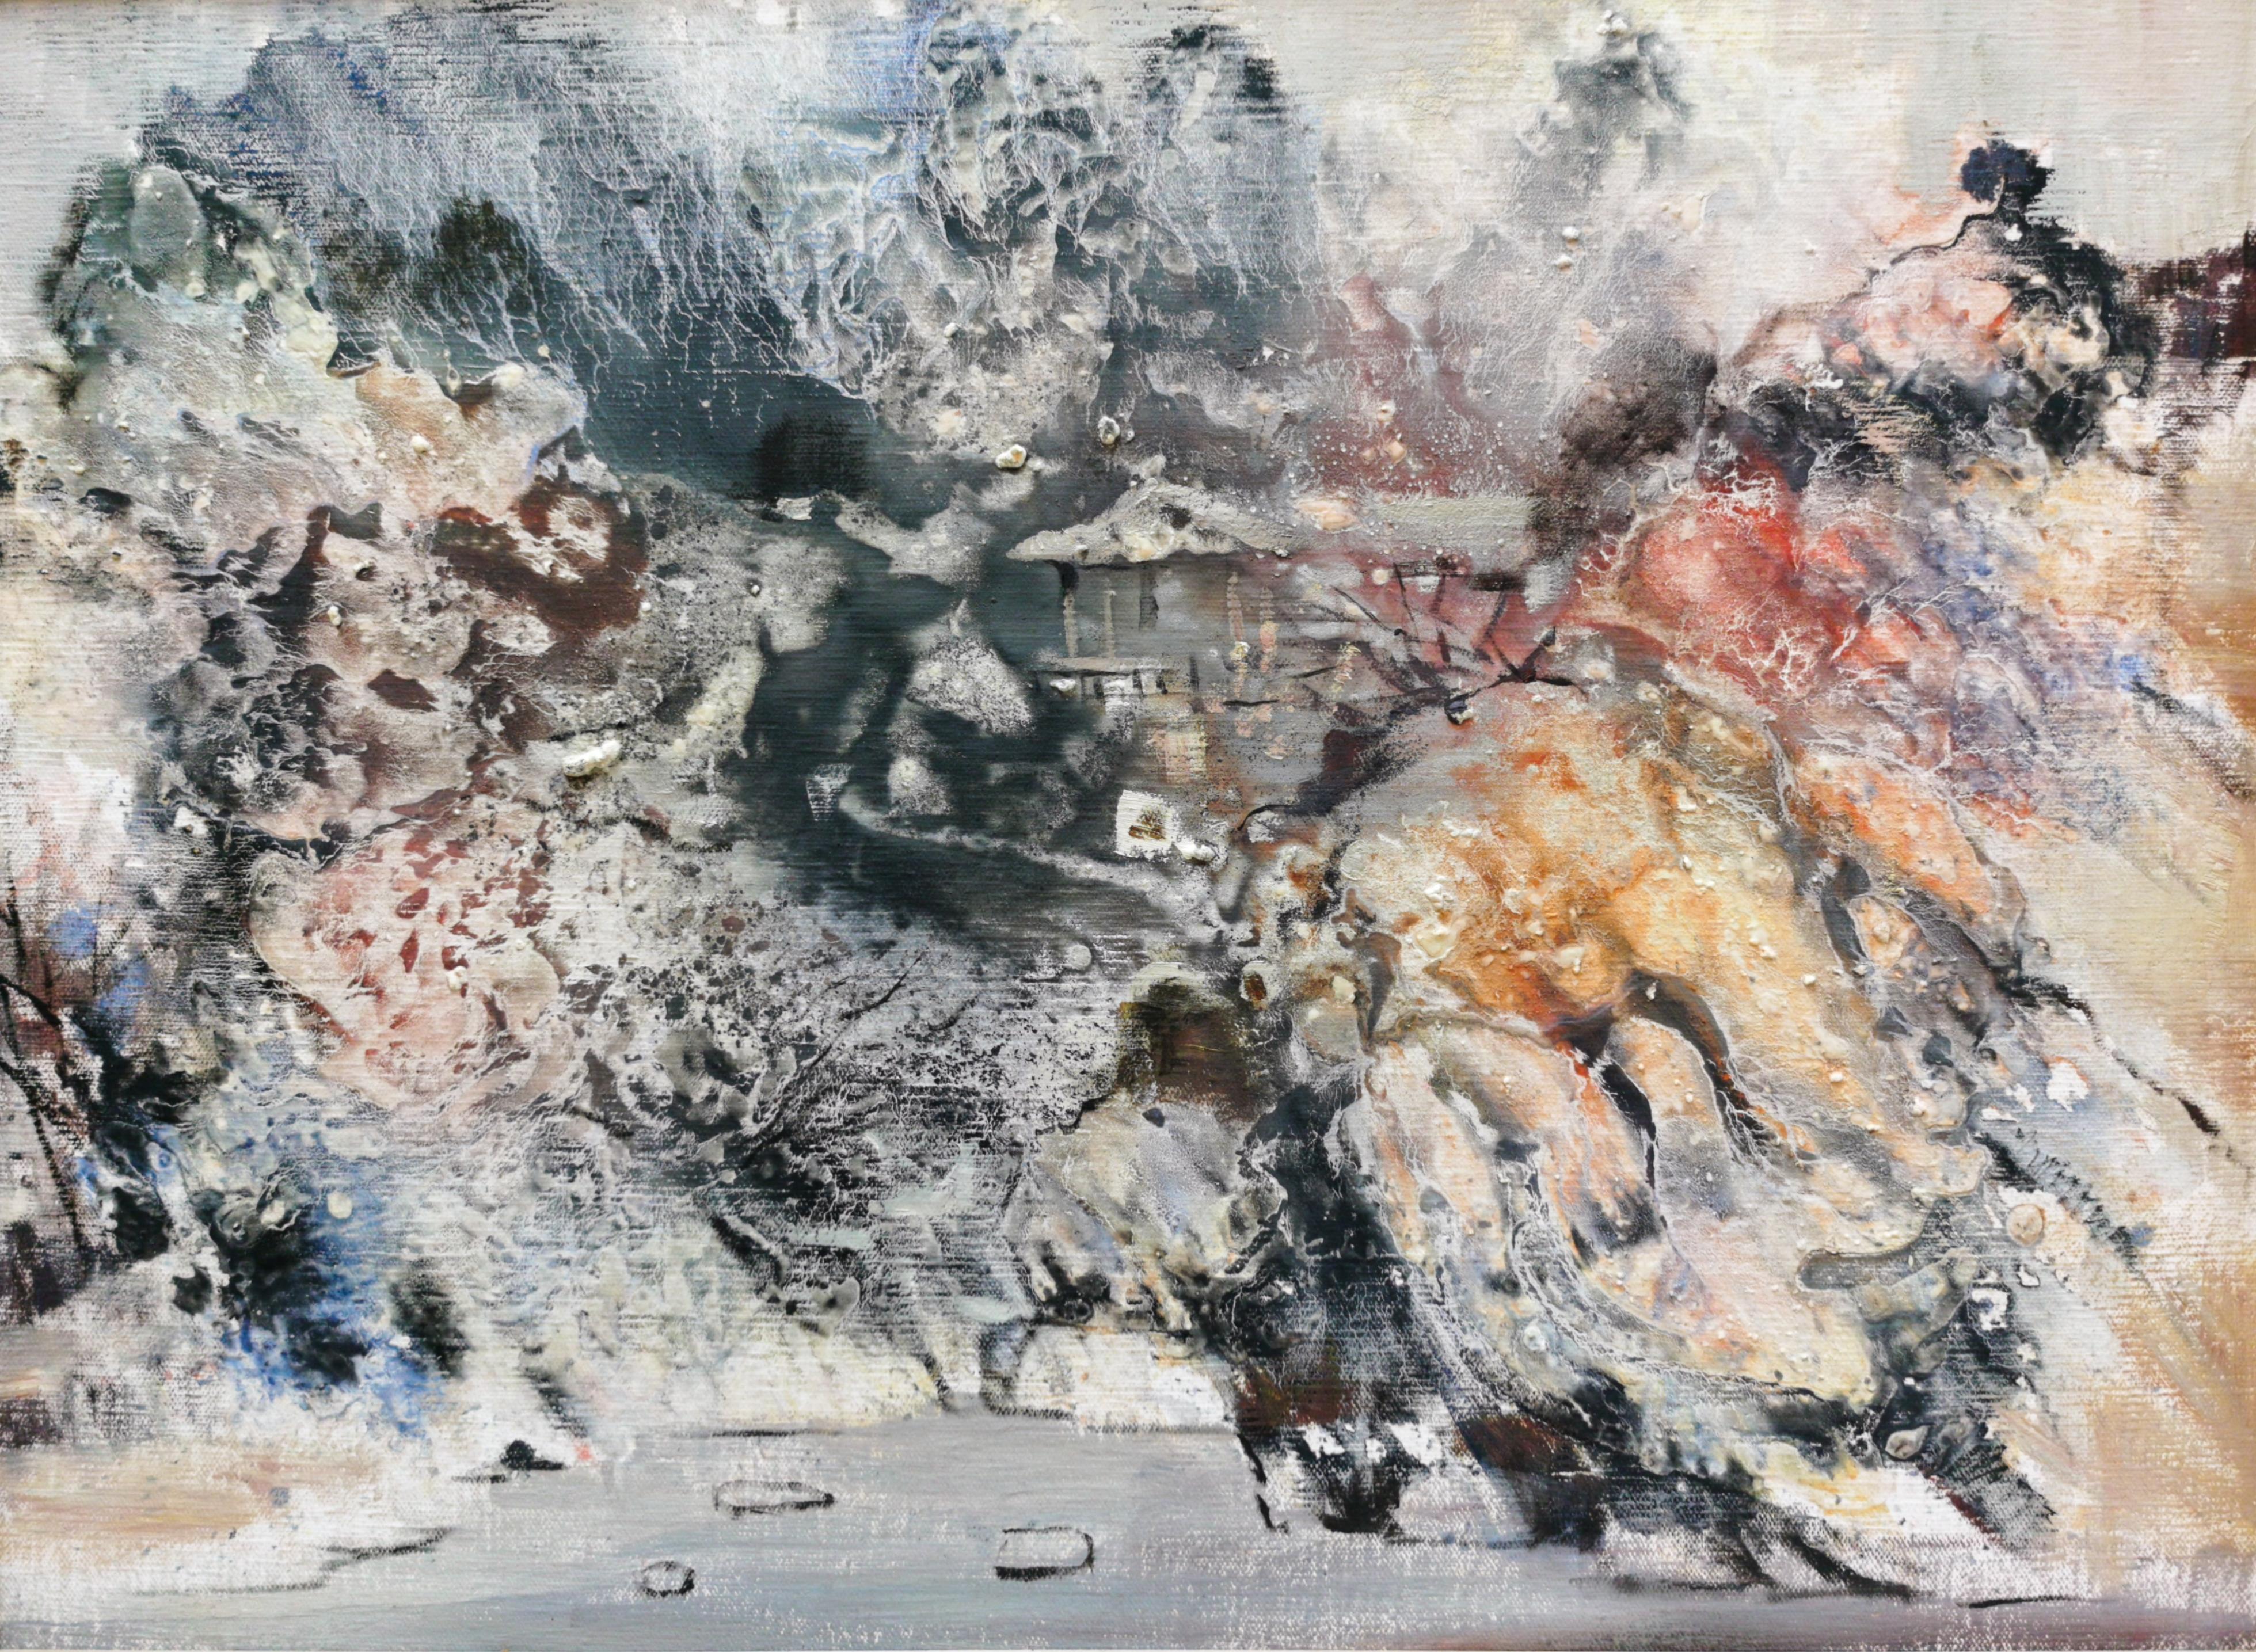 Chinese Contemporary Art by Diao Qing-Chun - Series The Landscape No.6